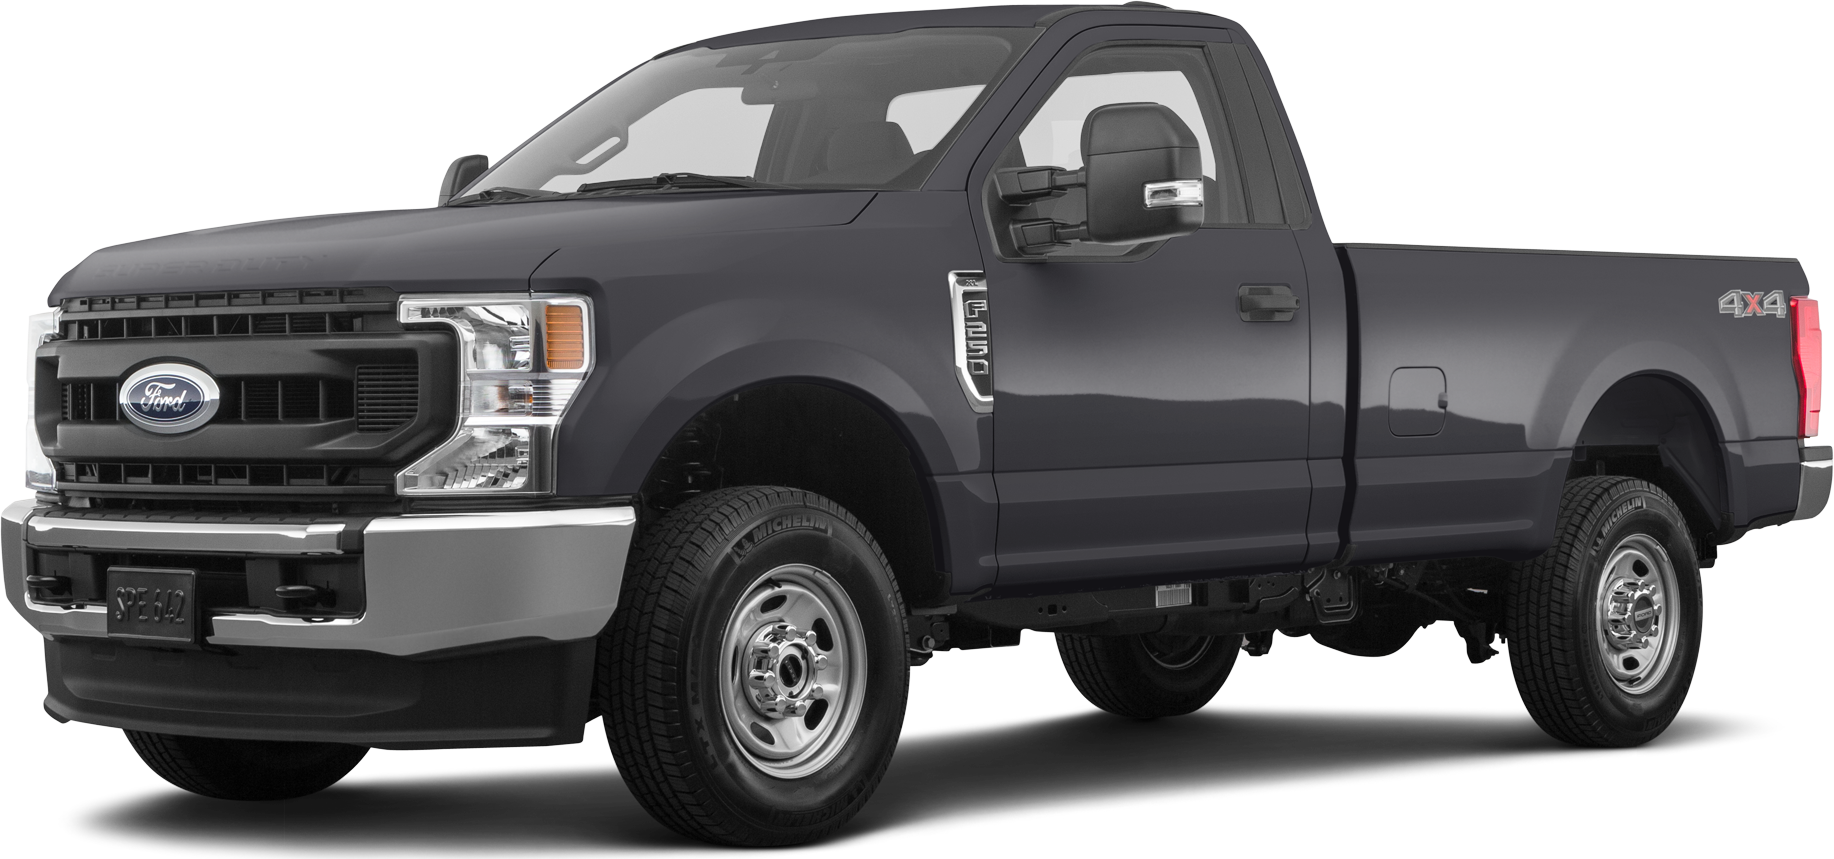 2020 Ford F350 Super Duty Regular Cab Price Value Ratings And Reviews